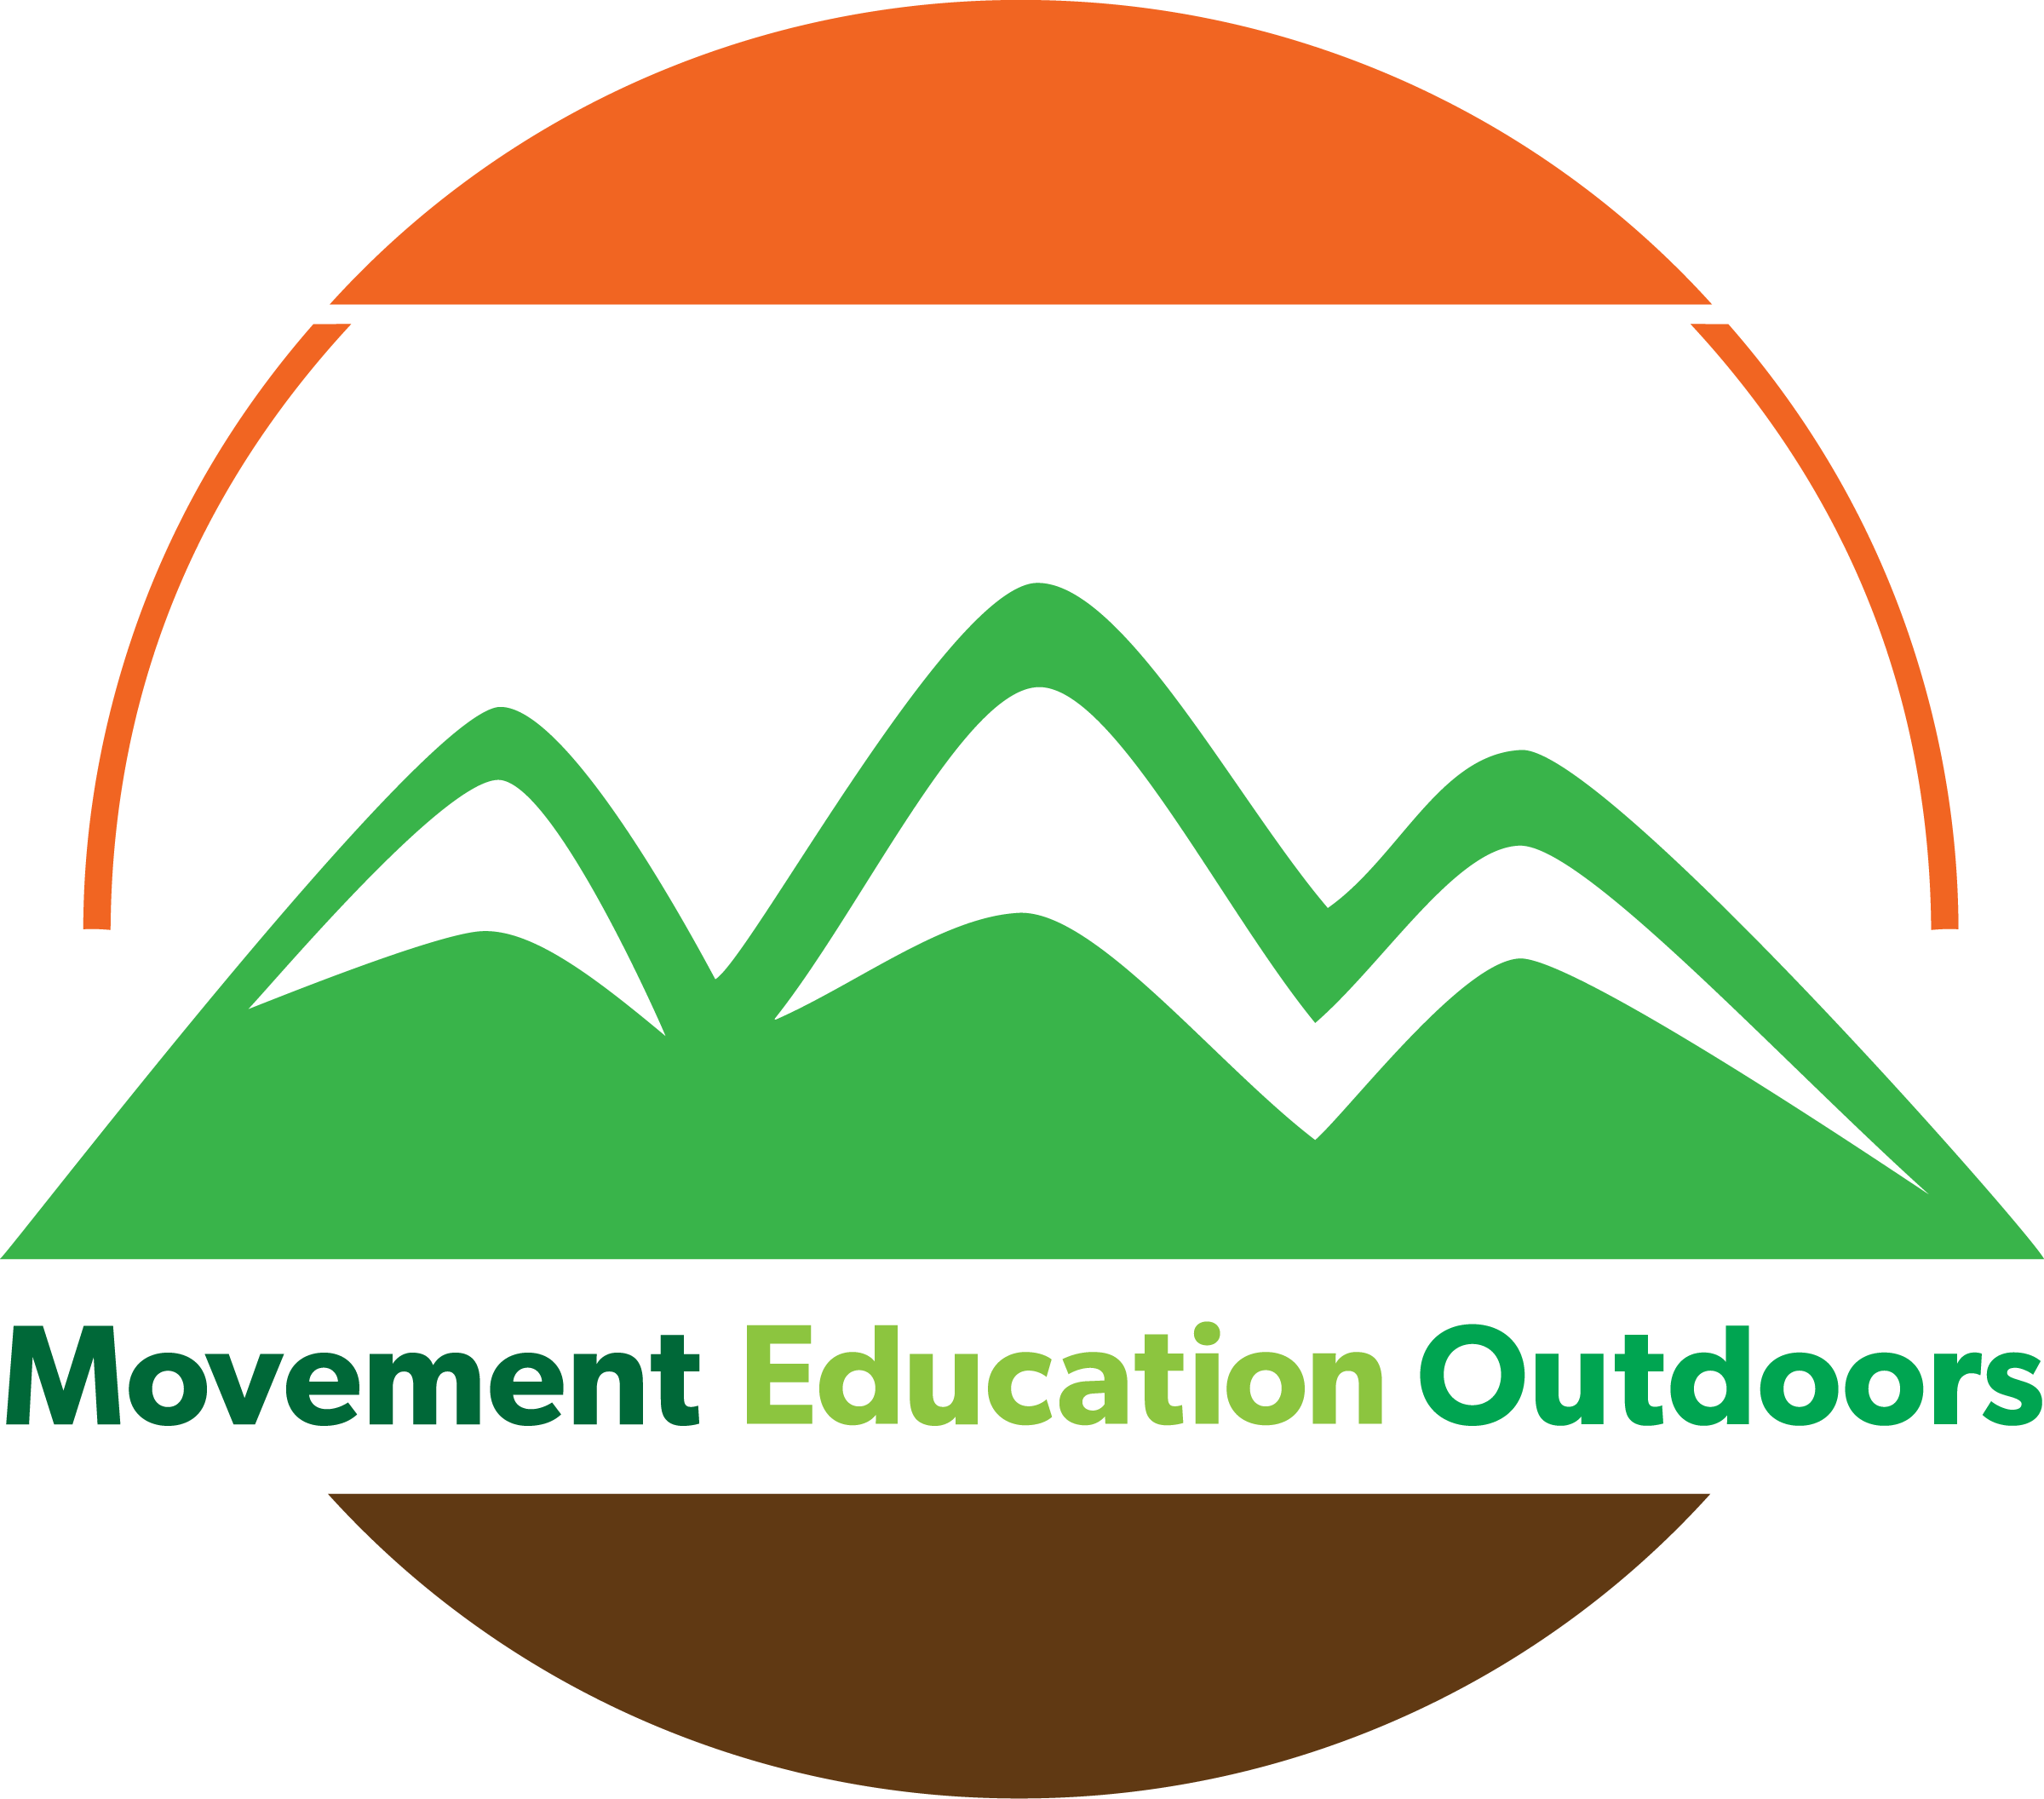 Movement Education Outdoors